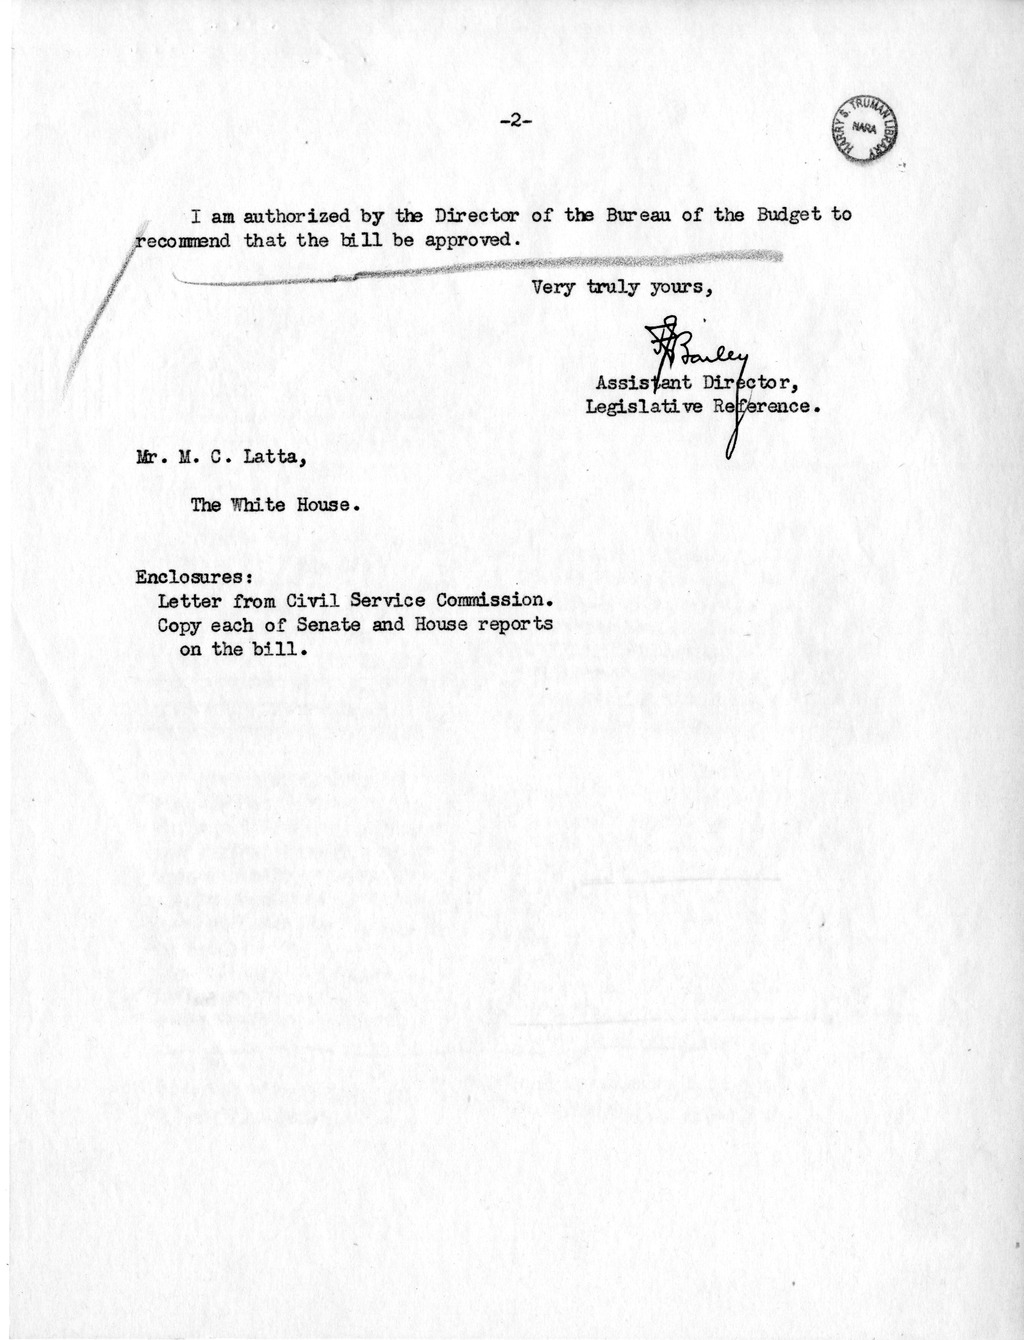 Memorandum from Frederick J. Bailey to M. C. Latta, S. 576, To Amend an Act Extending the Classified Executive Civil Service of the United States, Approved November 26, 1940, so as to Eliminate the Time Limit Within Which Incumbents of Positions Covered Into the Classified Service Pursuant to Such Act May be Recommended for Classification, with Attachments